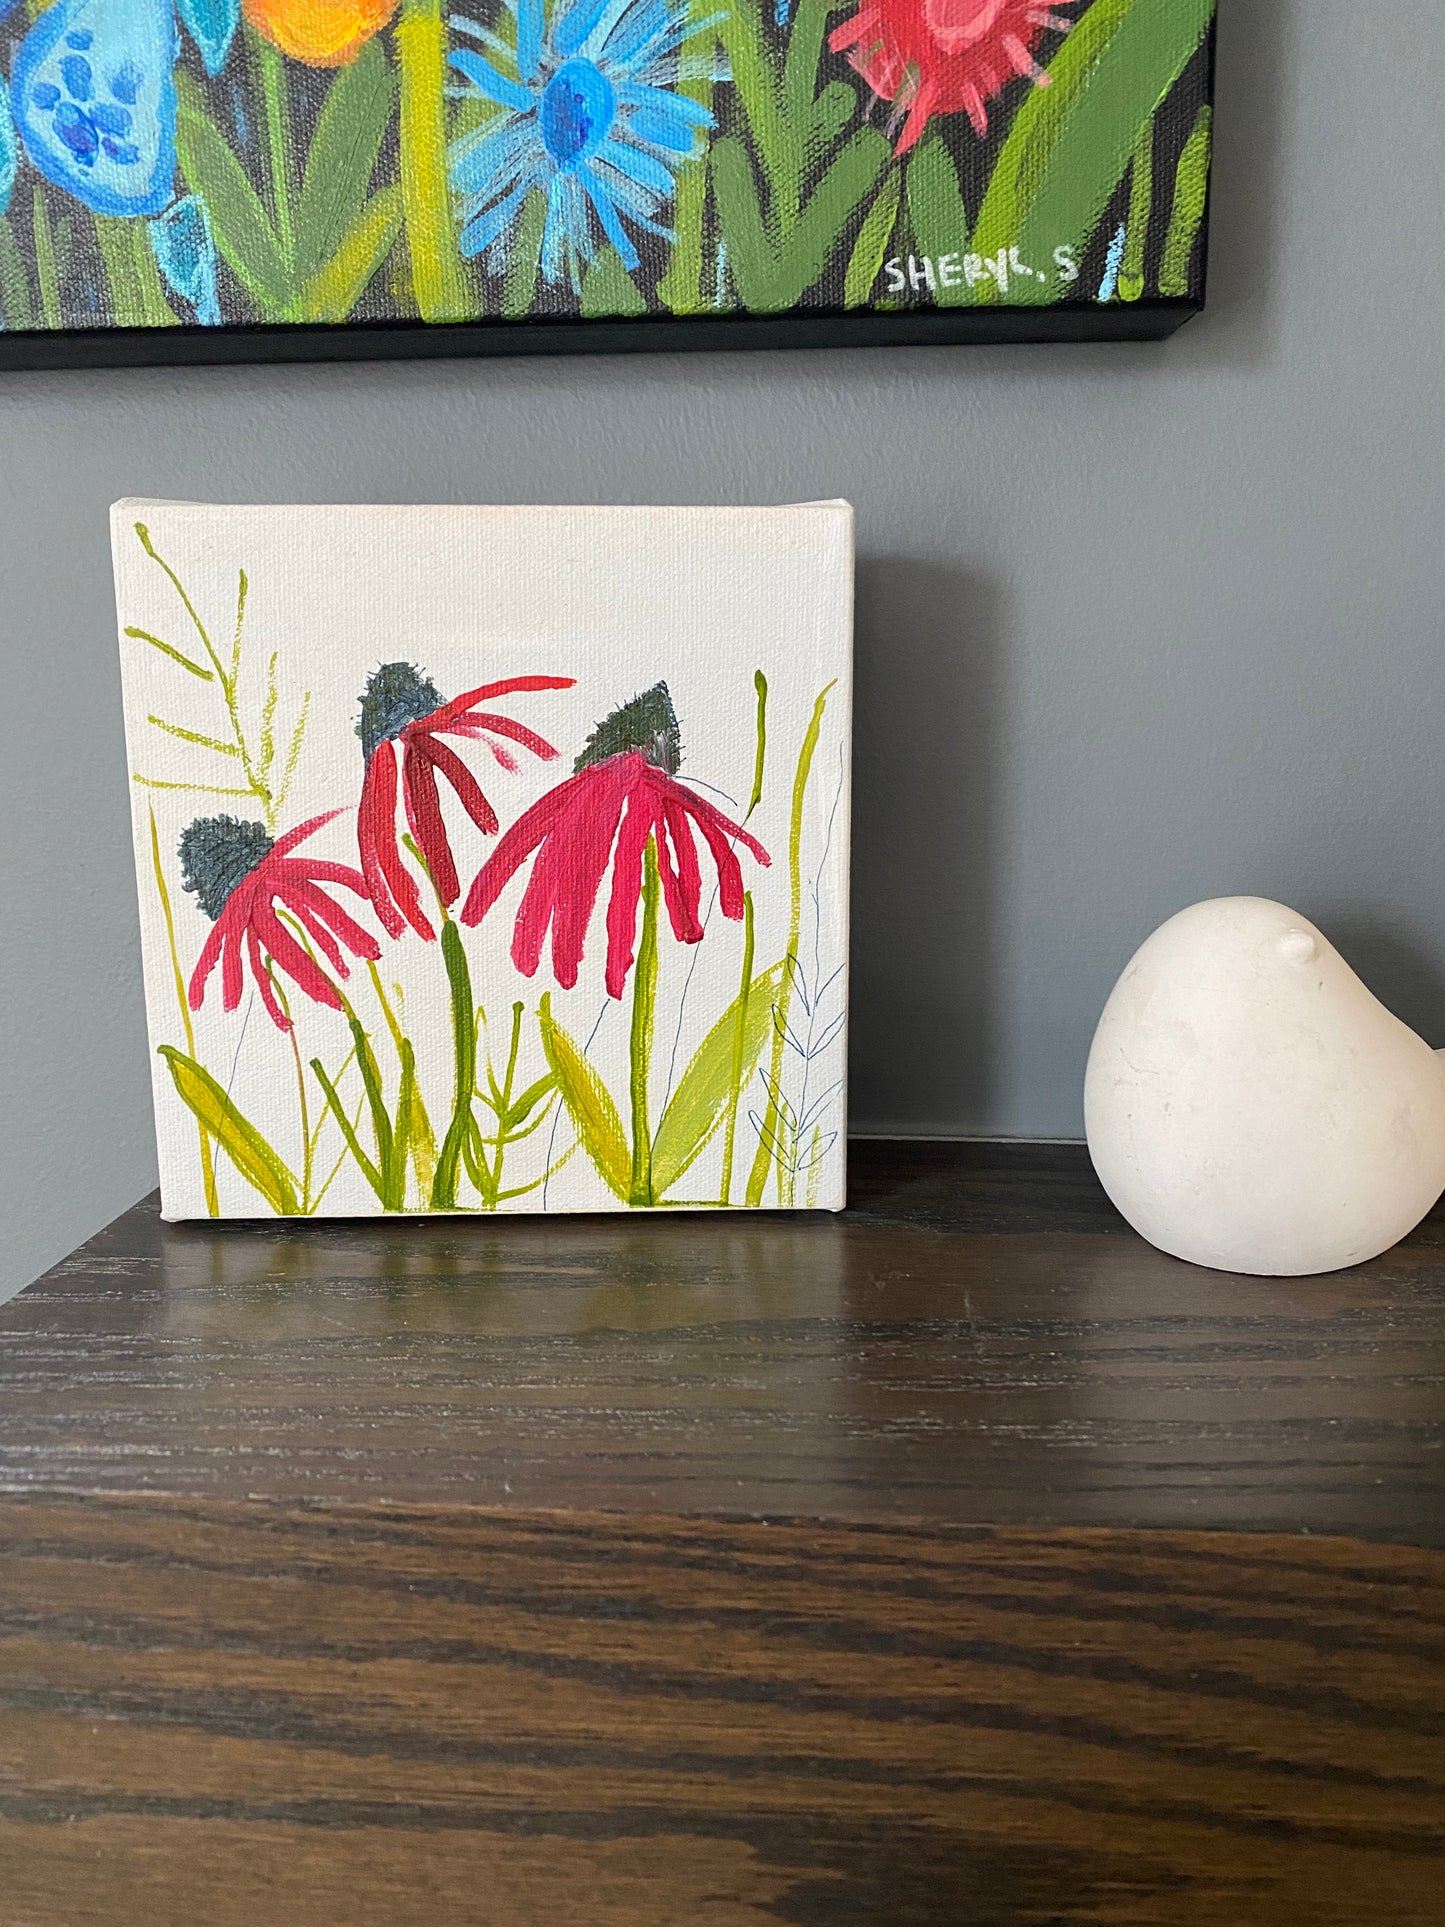 Original Art / Cone Flower / Wall Art on Canvas / Botanical Fowers / Red and Lime Green / Small Art